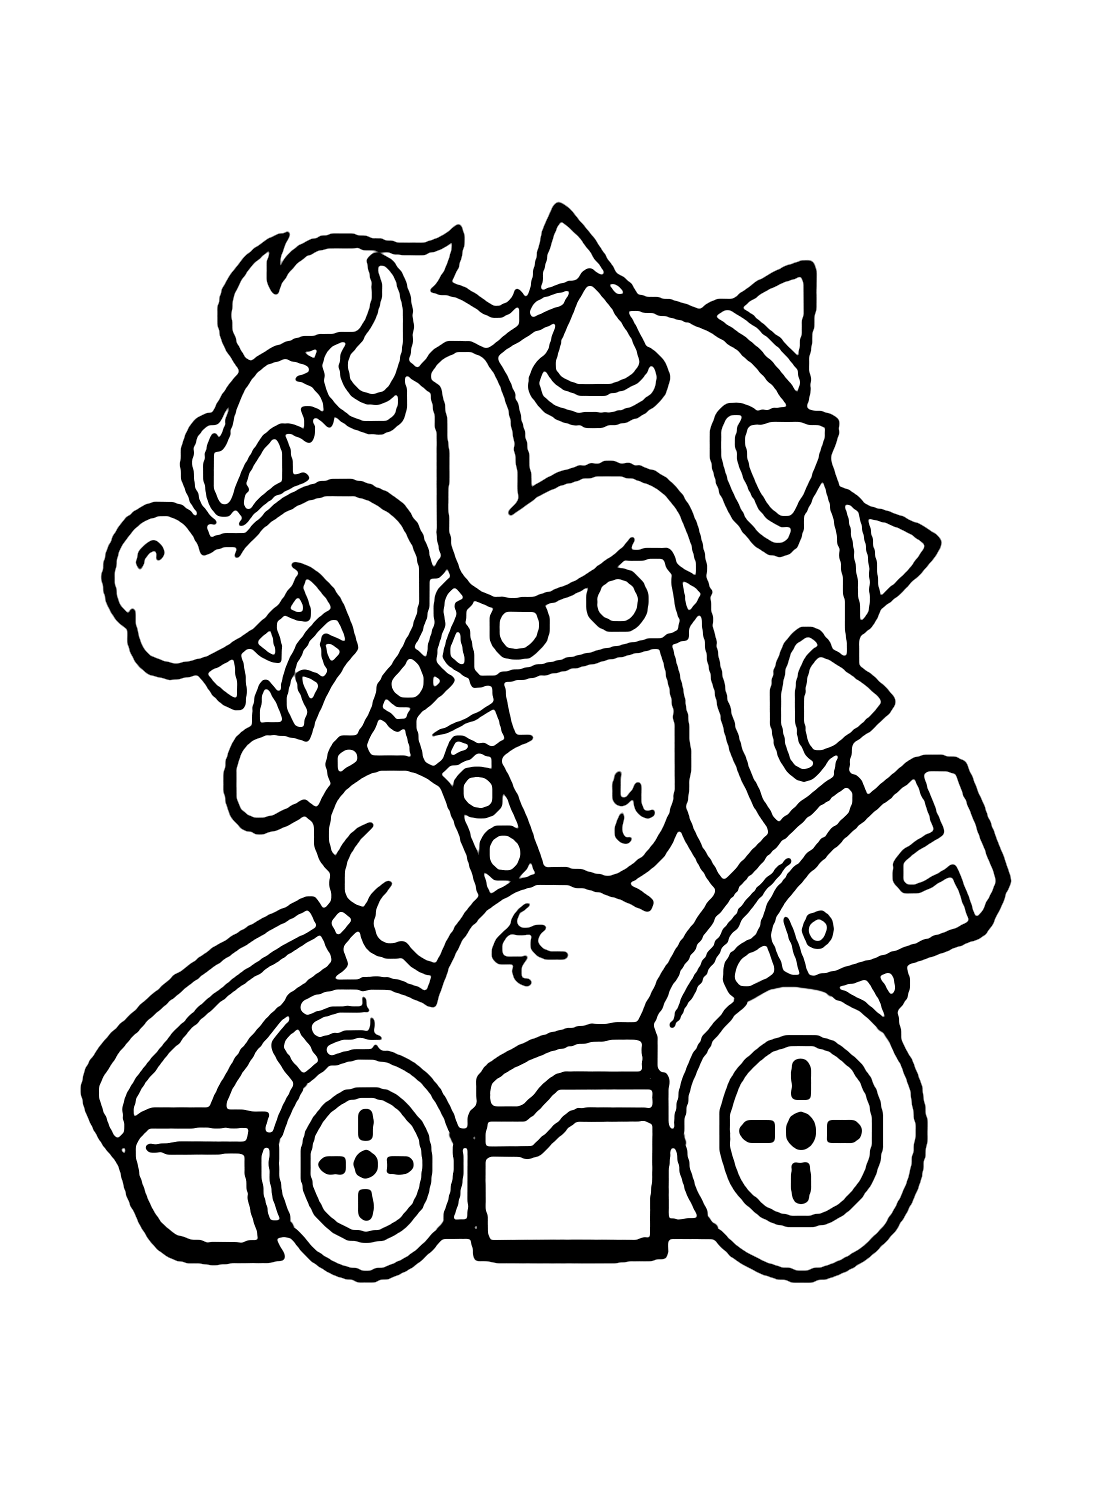 Bowser from Mario Kart Coloring Page